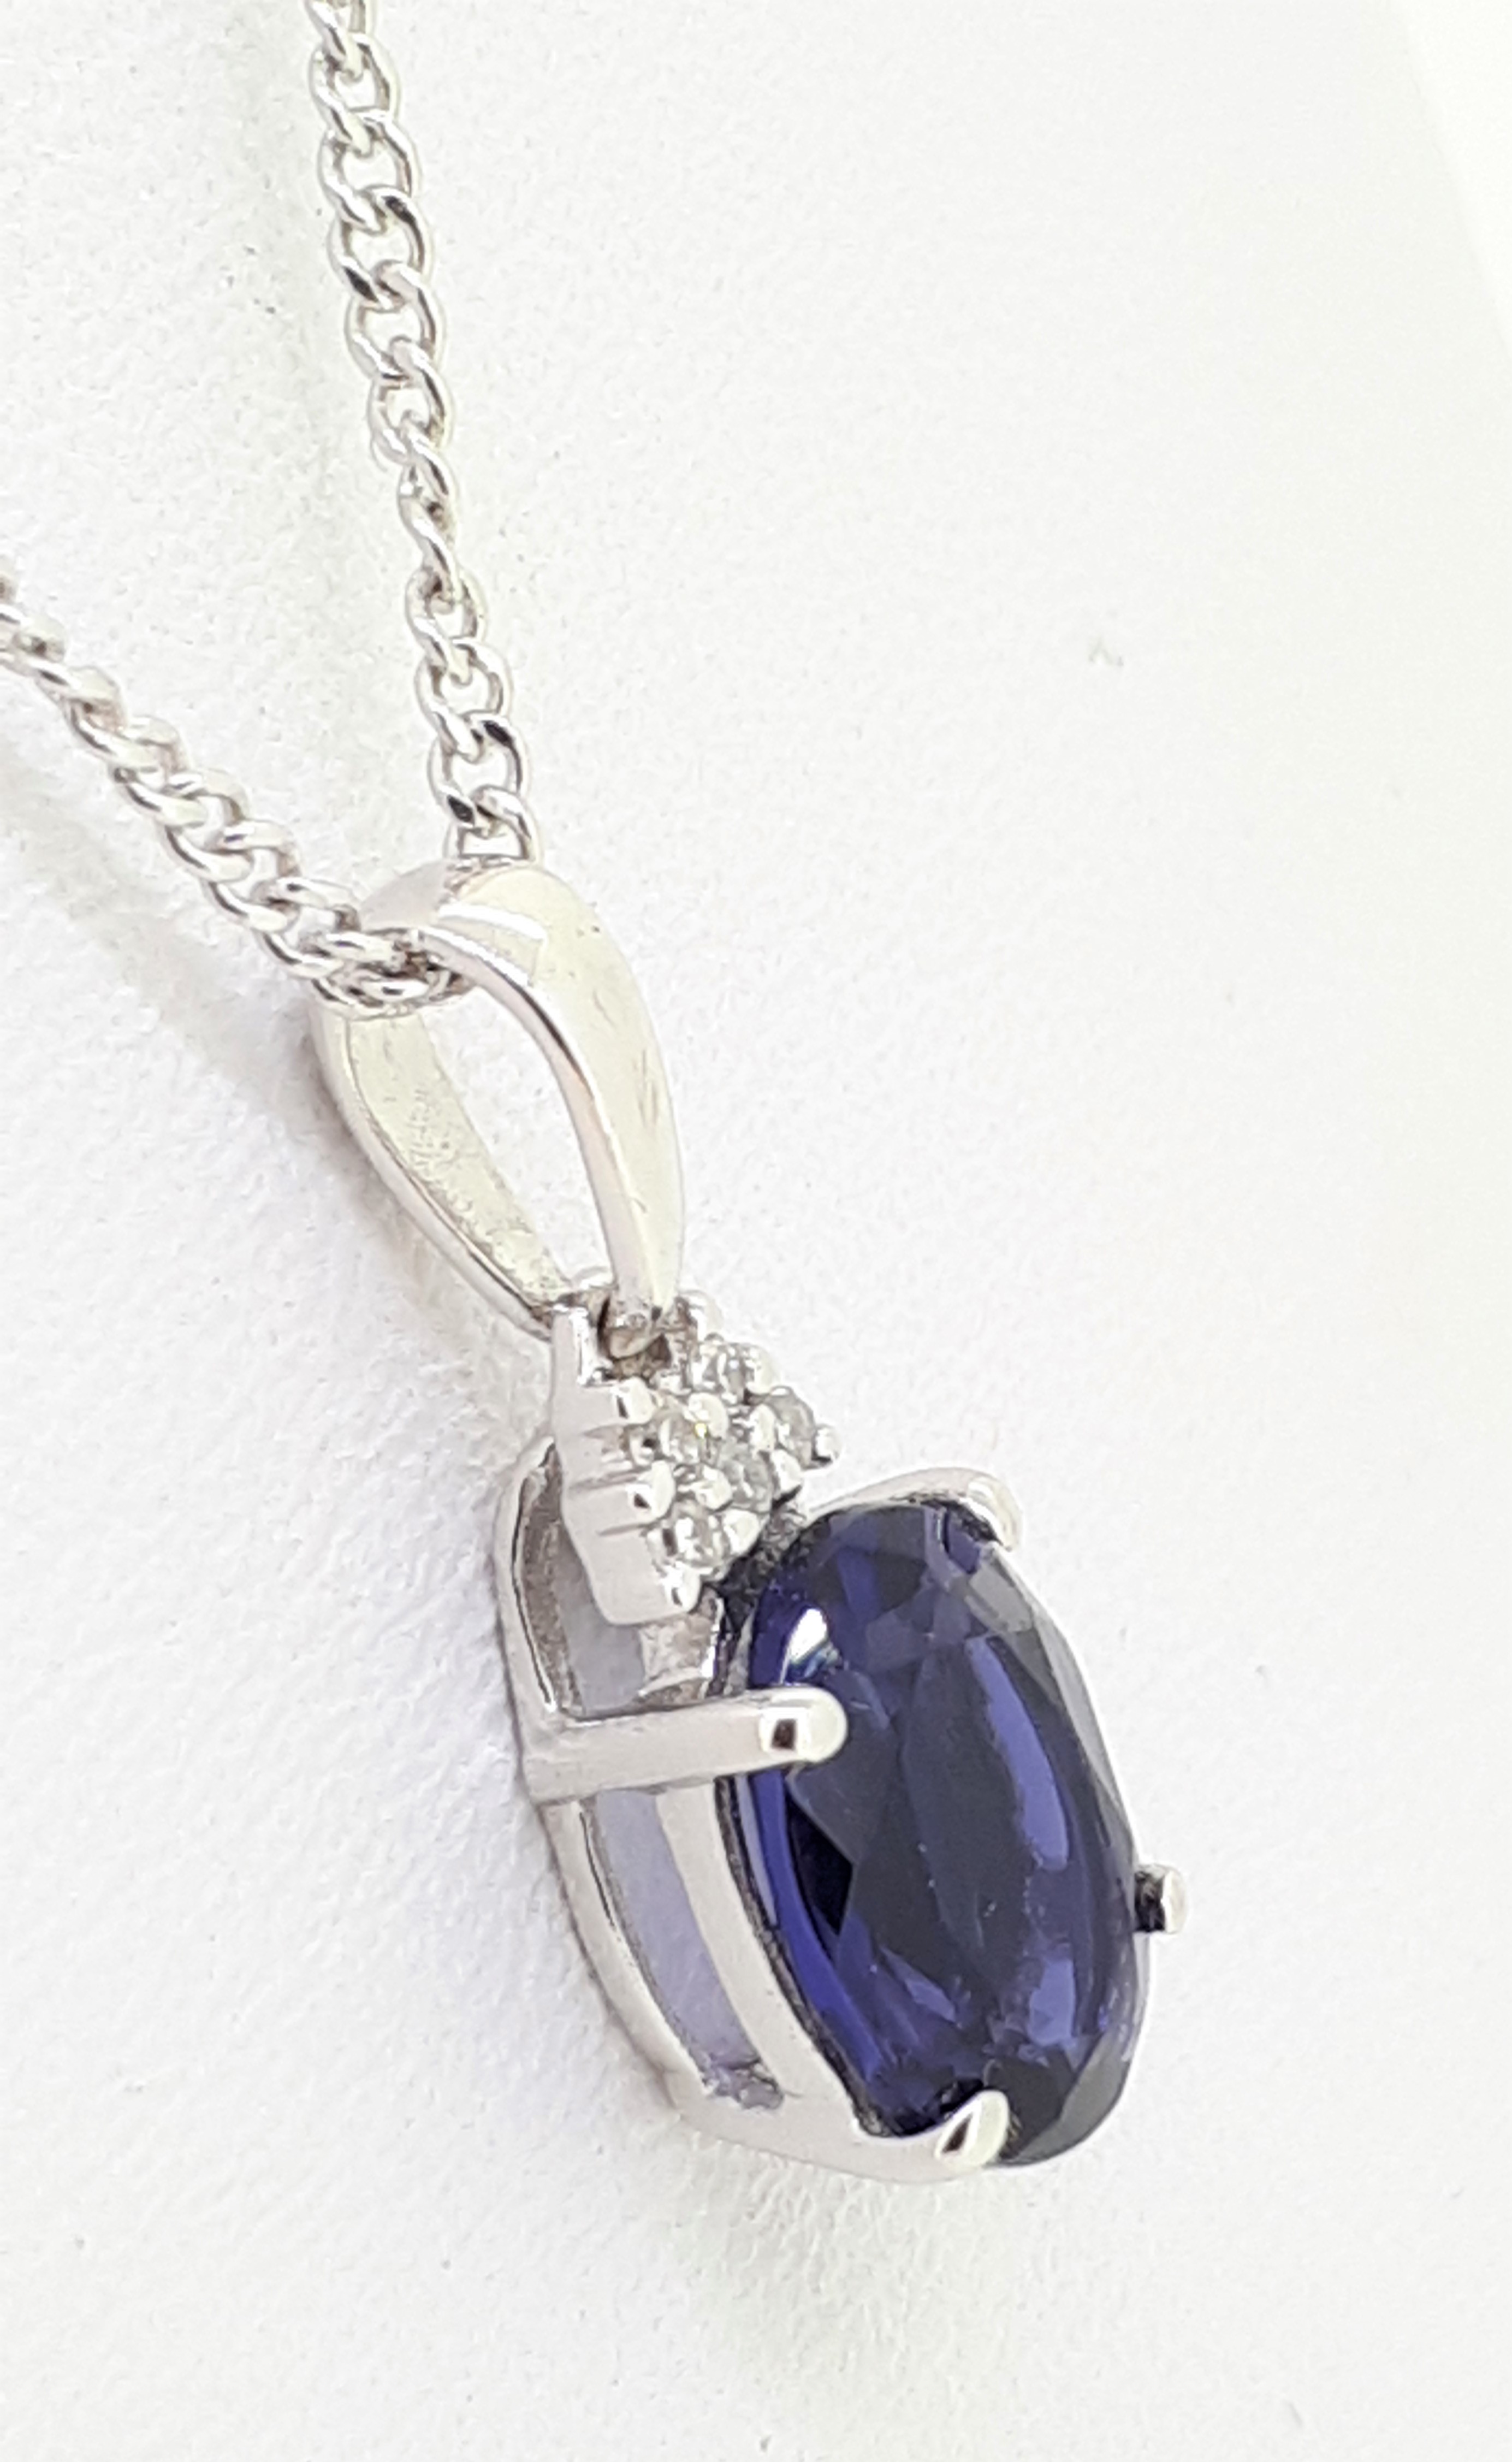 9ct (375) White Gold Diamond & Iolite Pendant on a Twisted Curb Chain - Image 2 of 5